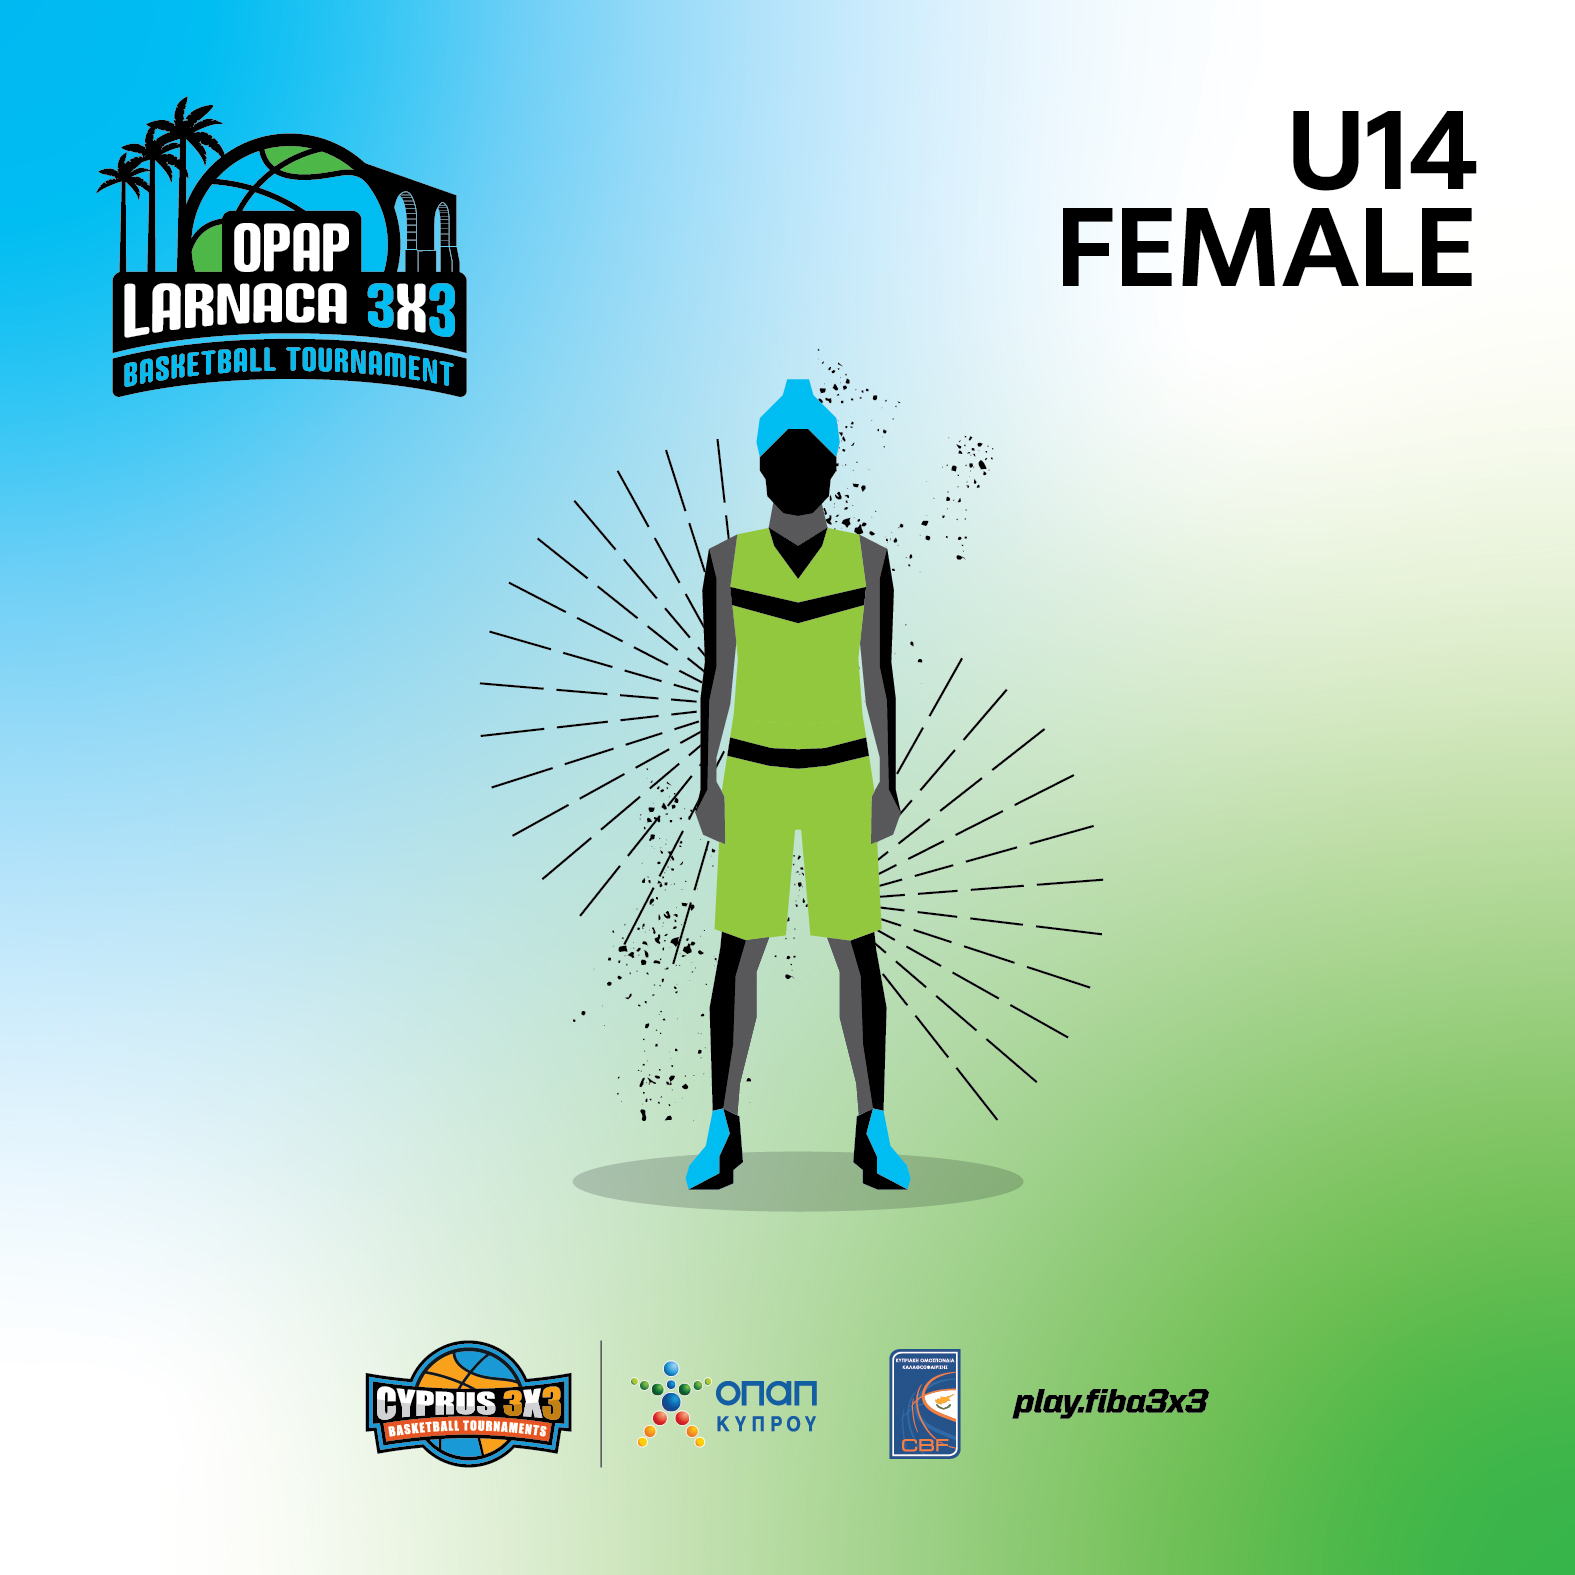 Read more about the article U14 Female – Larnaca 3×3